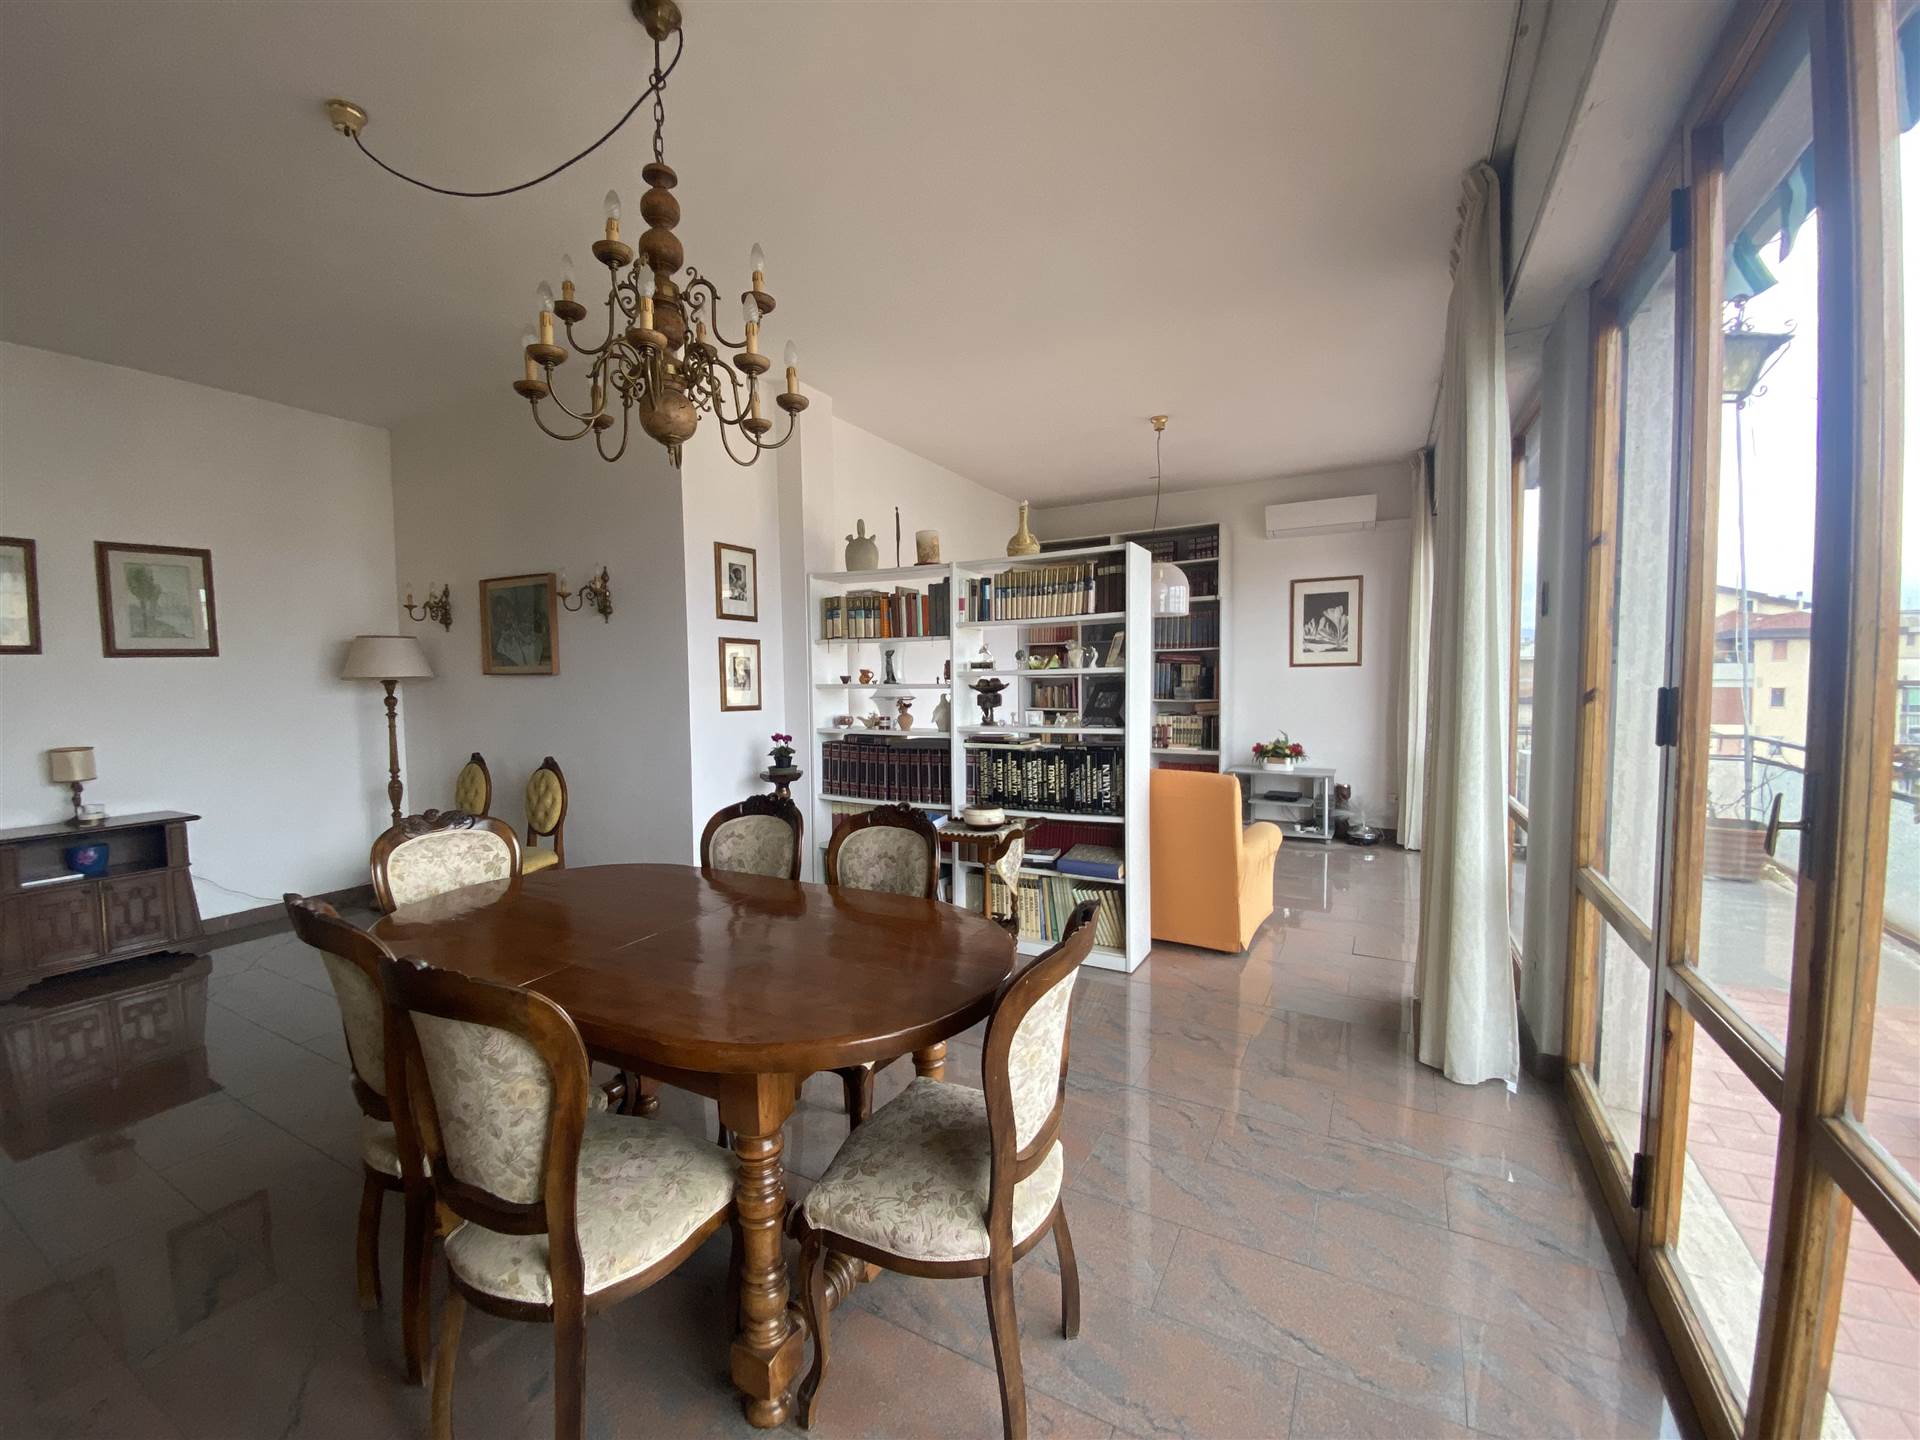 SAN IACOPINO, FIRENZE, Apartment for sale of 166 Sq. mt., Habitable, Heating Centralized, Energetic class: G, Epi: 175 kwh/m2 year, placed at 6° on 6,